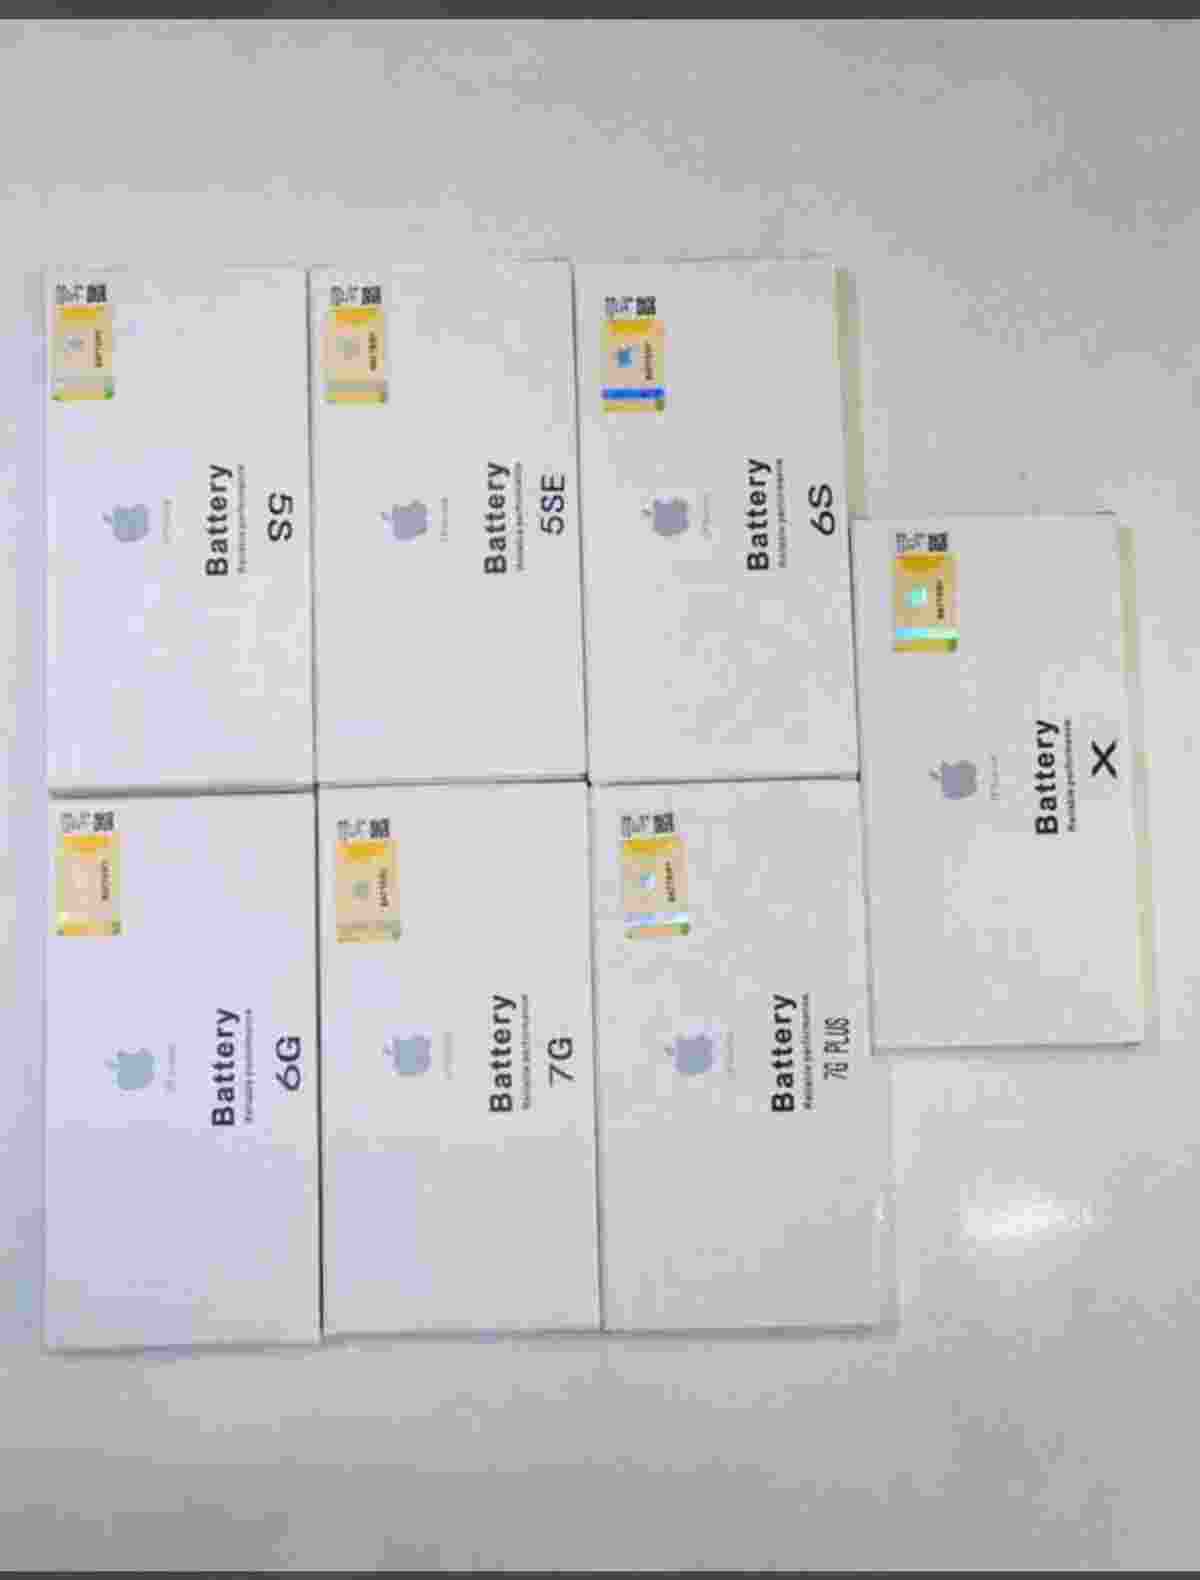 Apple iPHone Batteries 5S, 5SE, 6S, 6G, 7G, 6G Pluse, X iphones All Types of Batteries wholesale